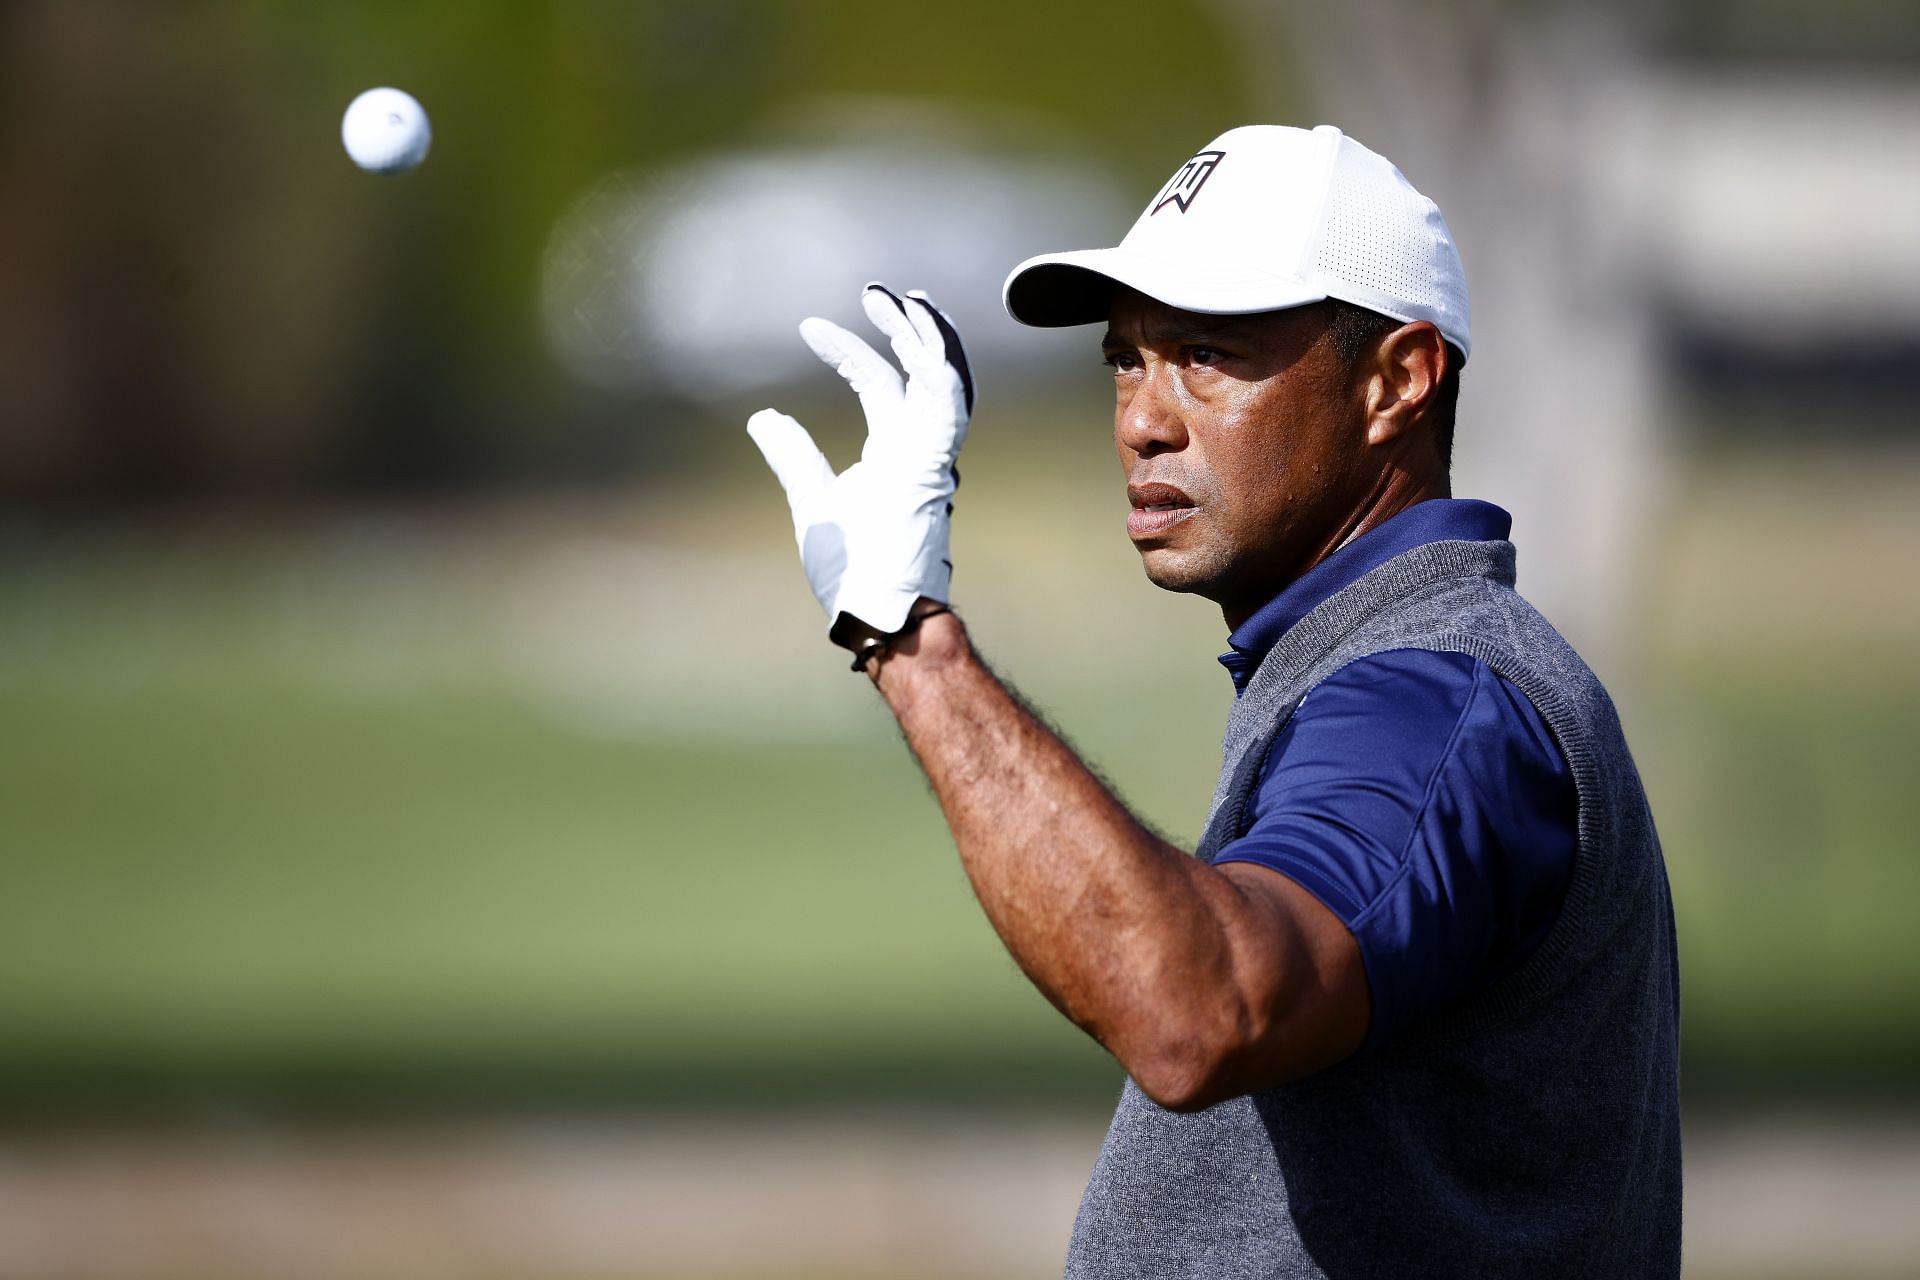 Tiger Woods may not have much time left